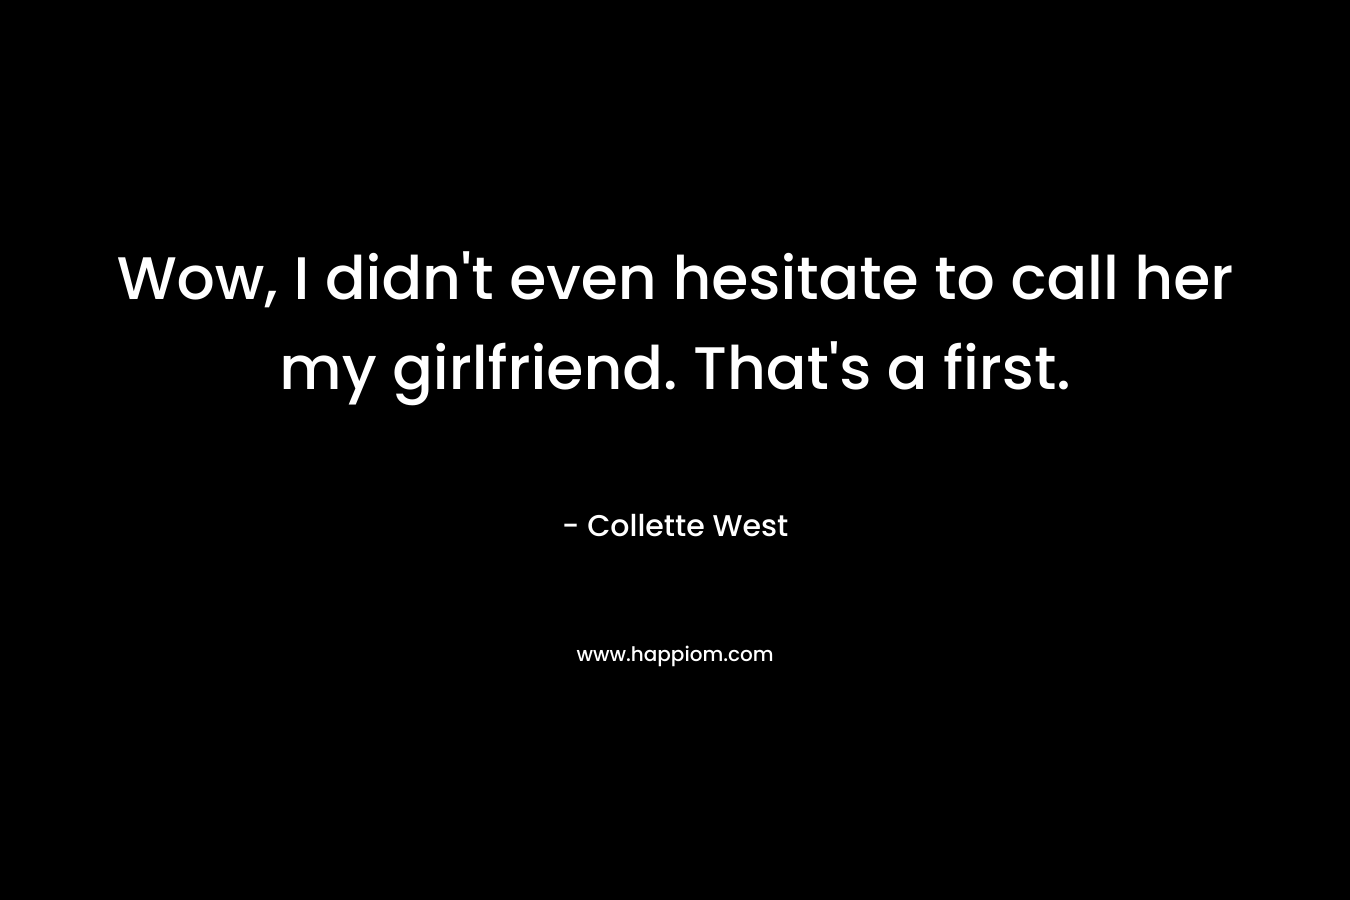 Wow, I didn’t even hesitate to call her my girlfriend. That’s a first. – Collette West